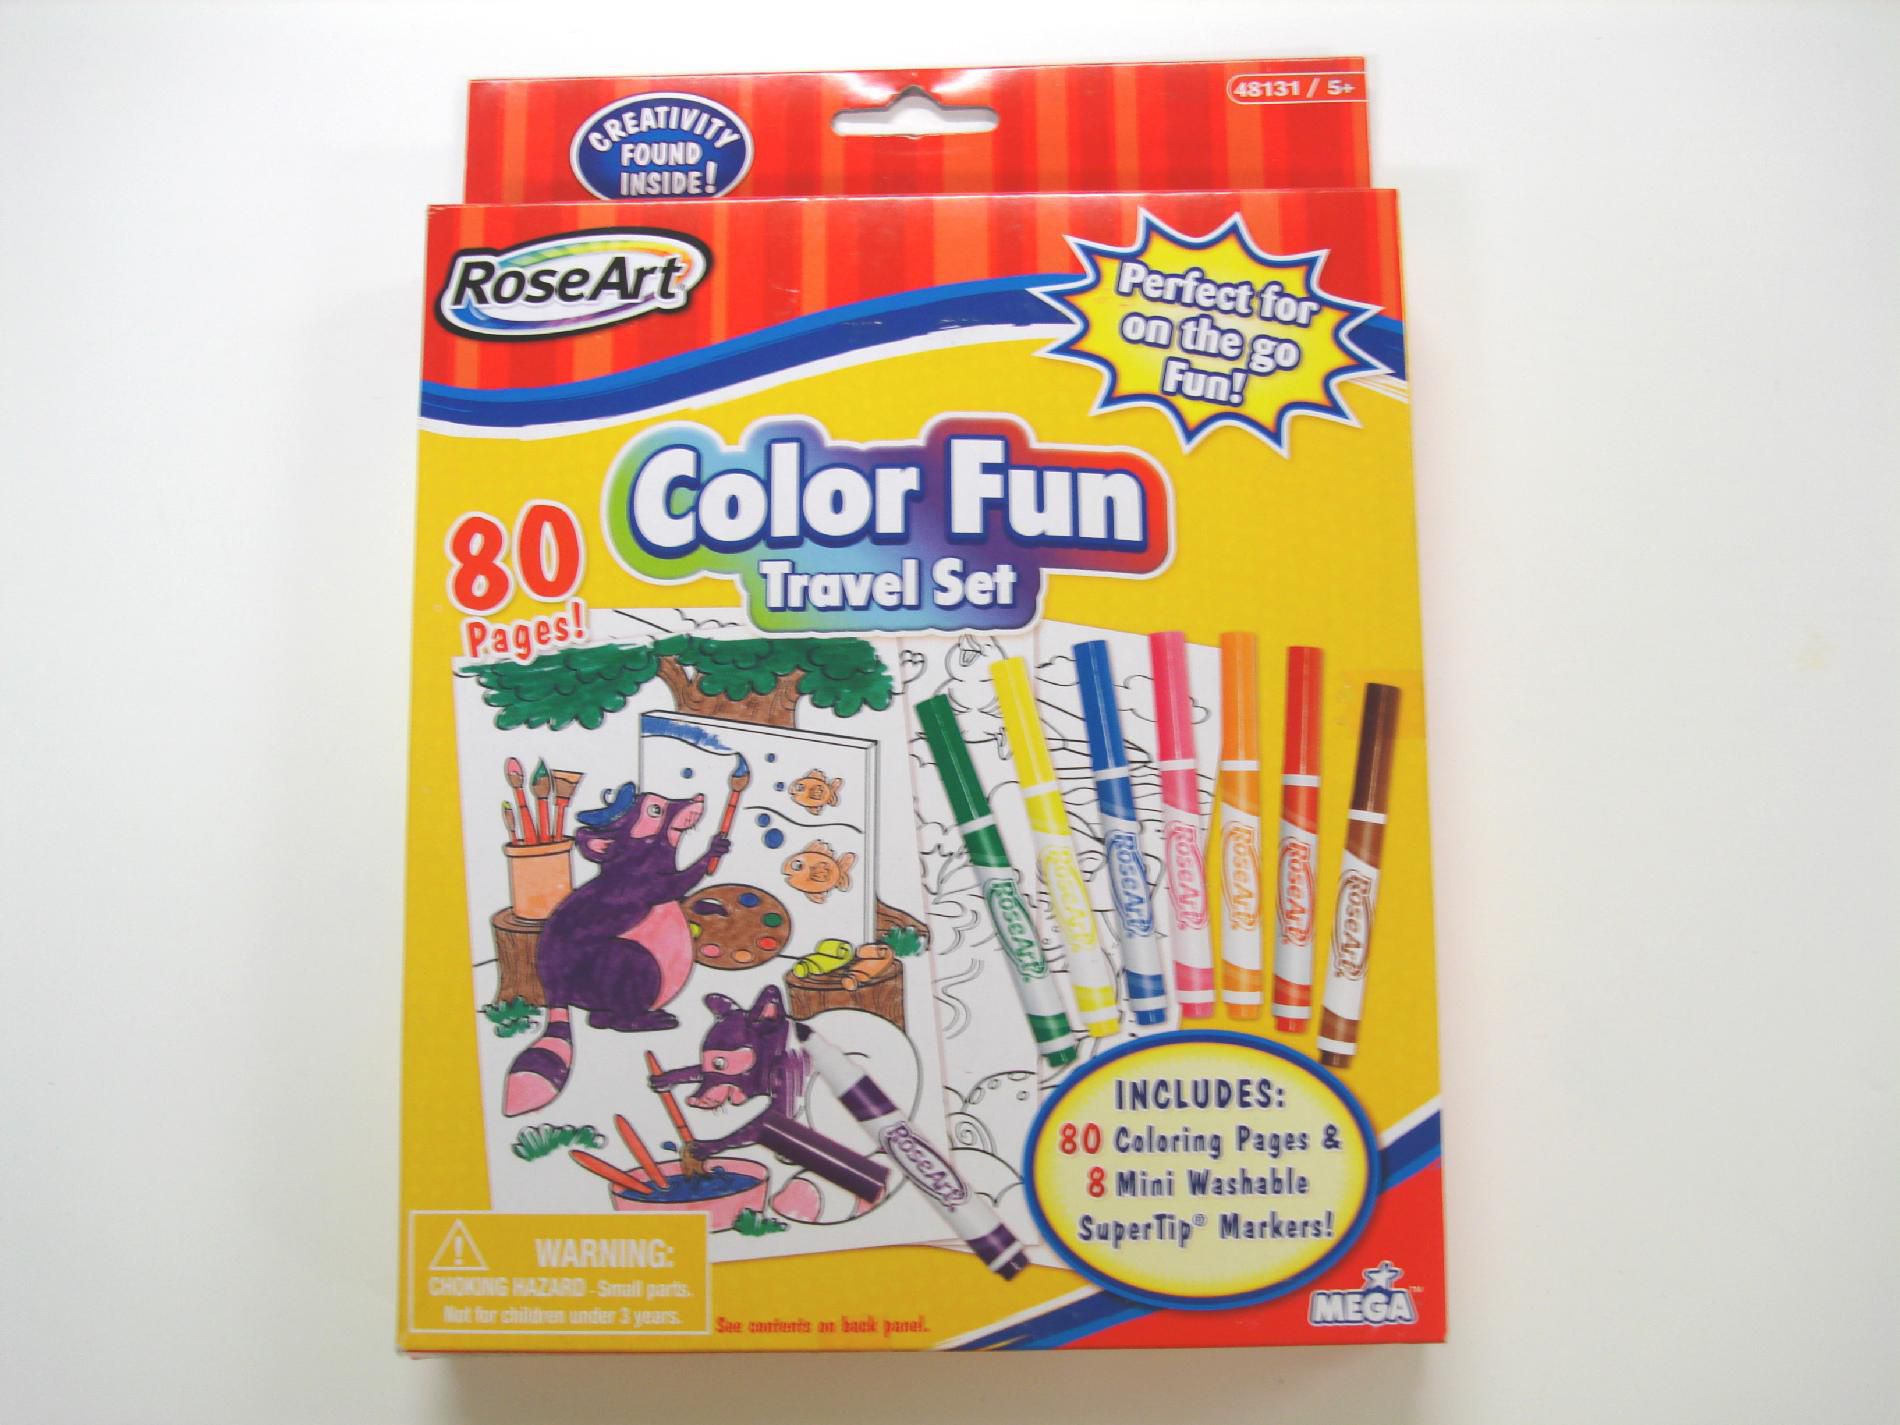 RoseArt Color Fun Travel Set 80 pages, 8 mini Washable Super Tip Markers